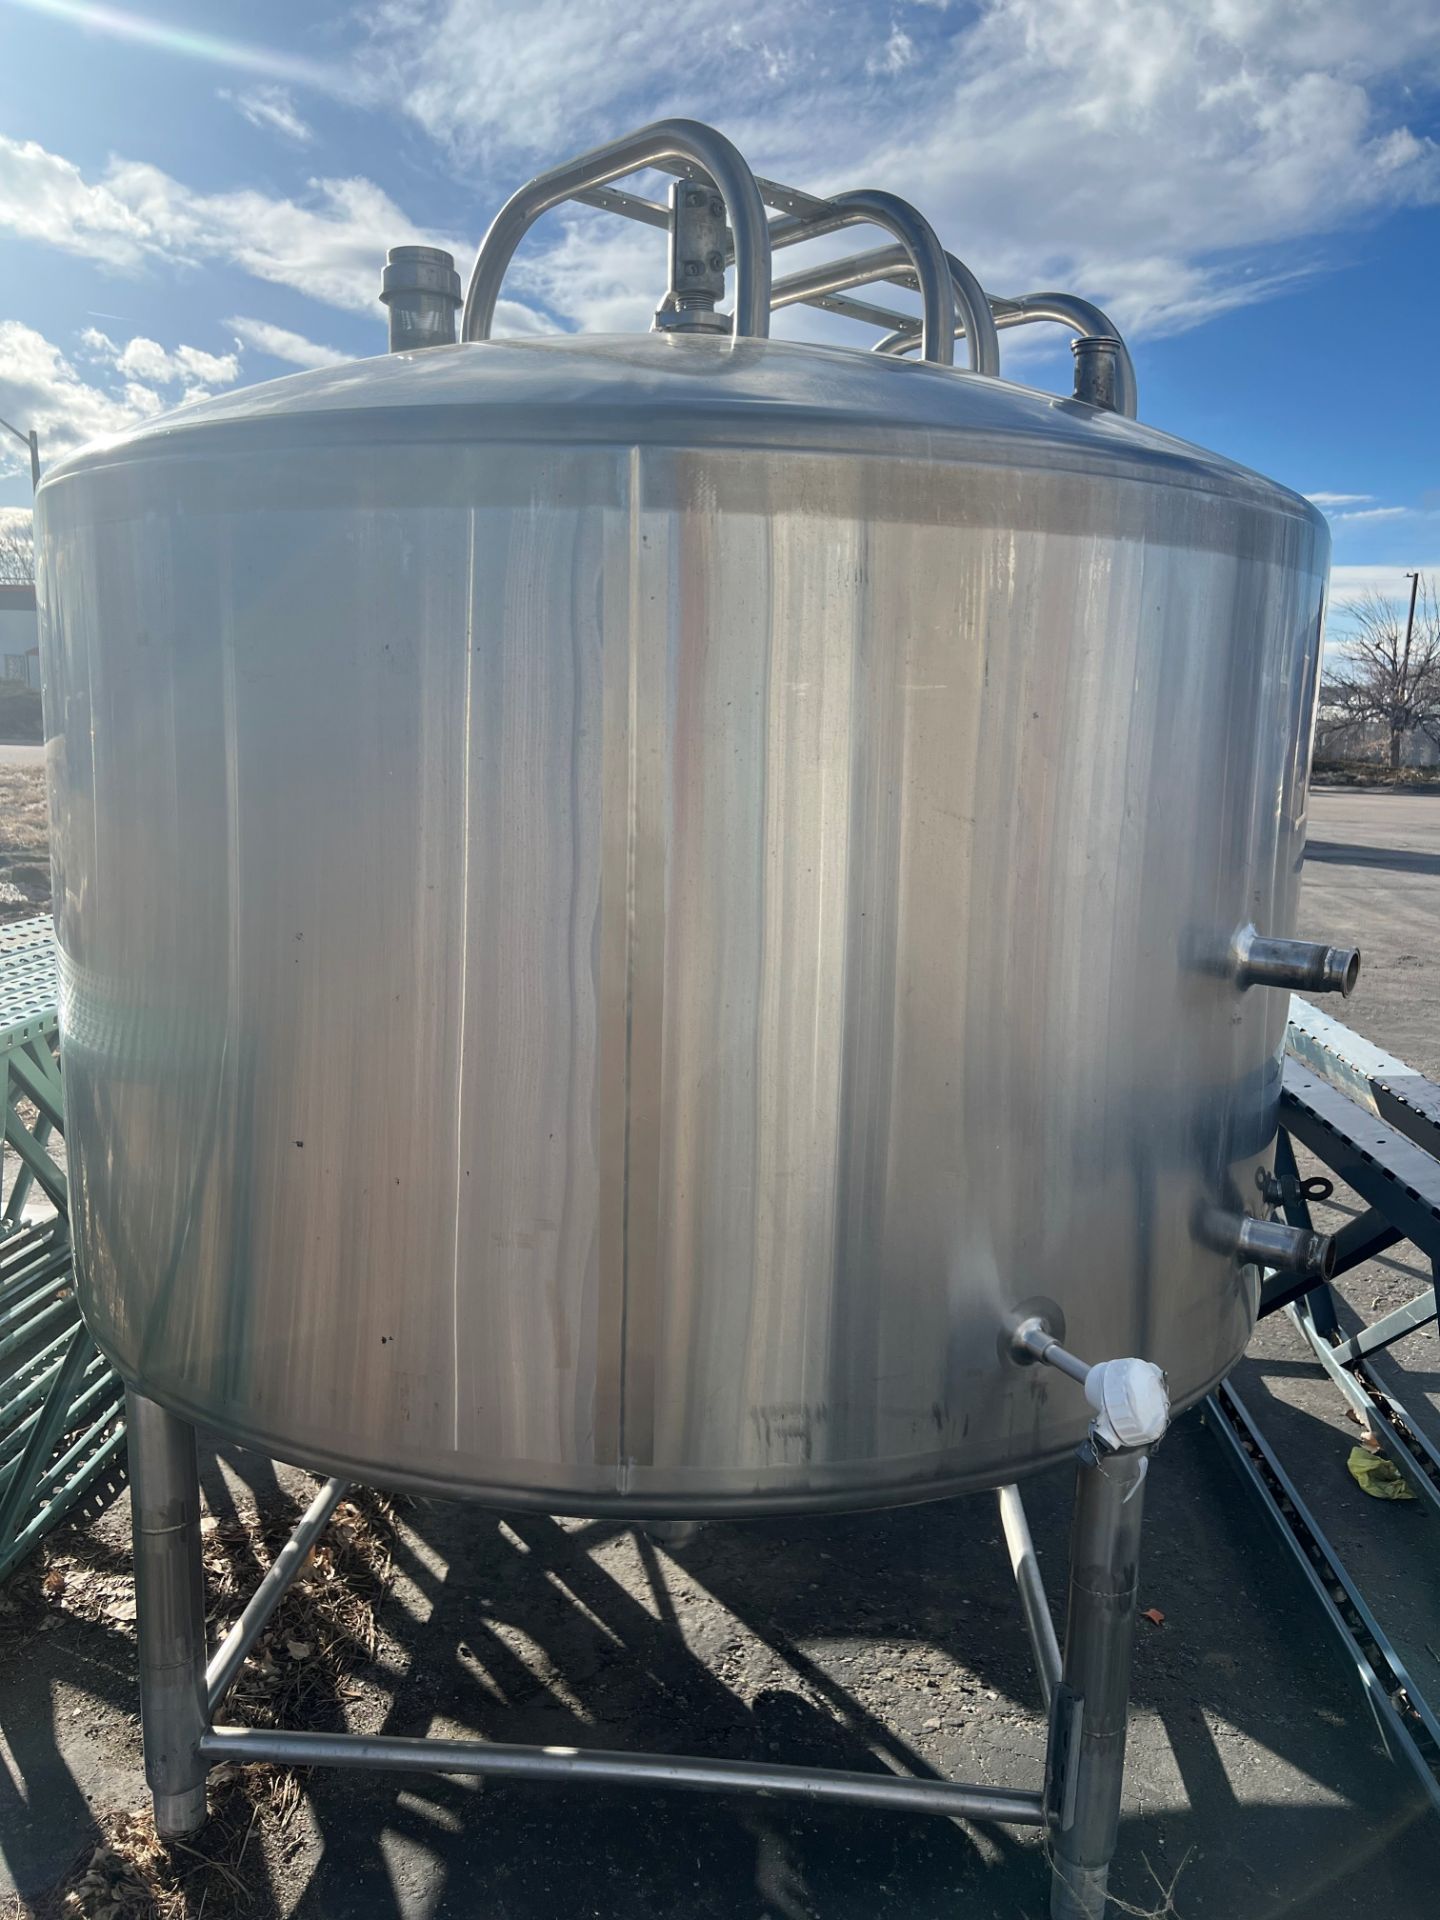 DCI 800 Gal. S/S Tank, S/N 84-RH-31216-A, Aprox. 8' Hight x 6" Diameter (Located Denver, CO 80239) - Image 2 of 4